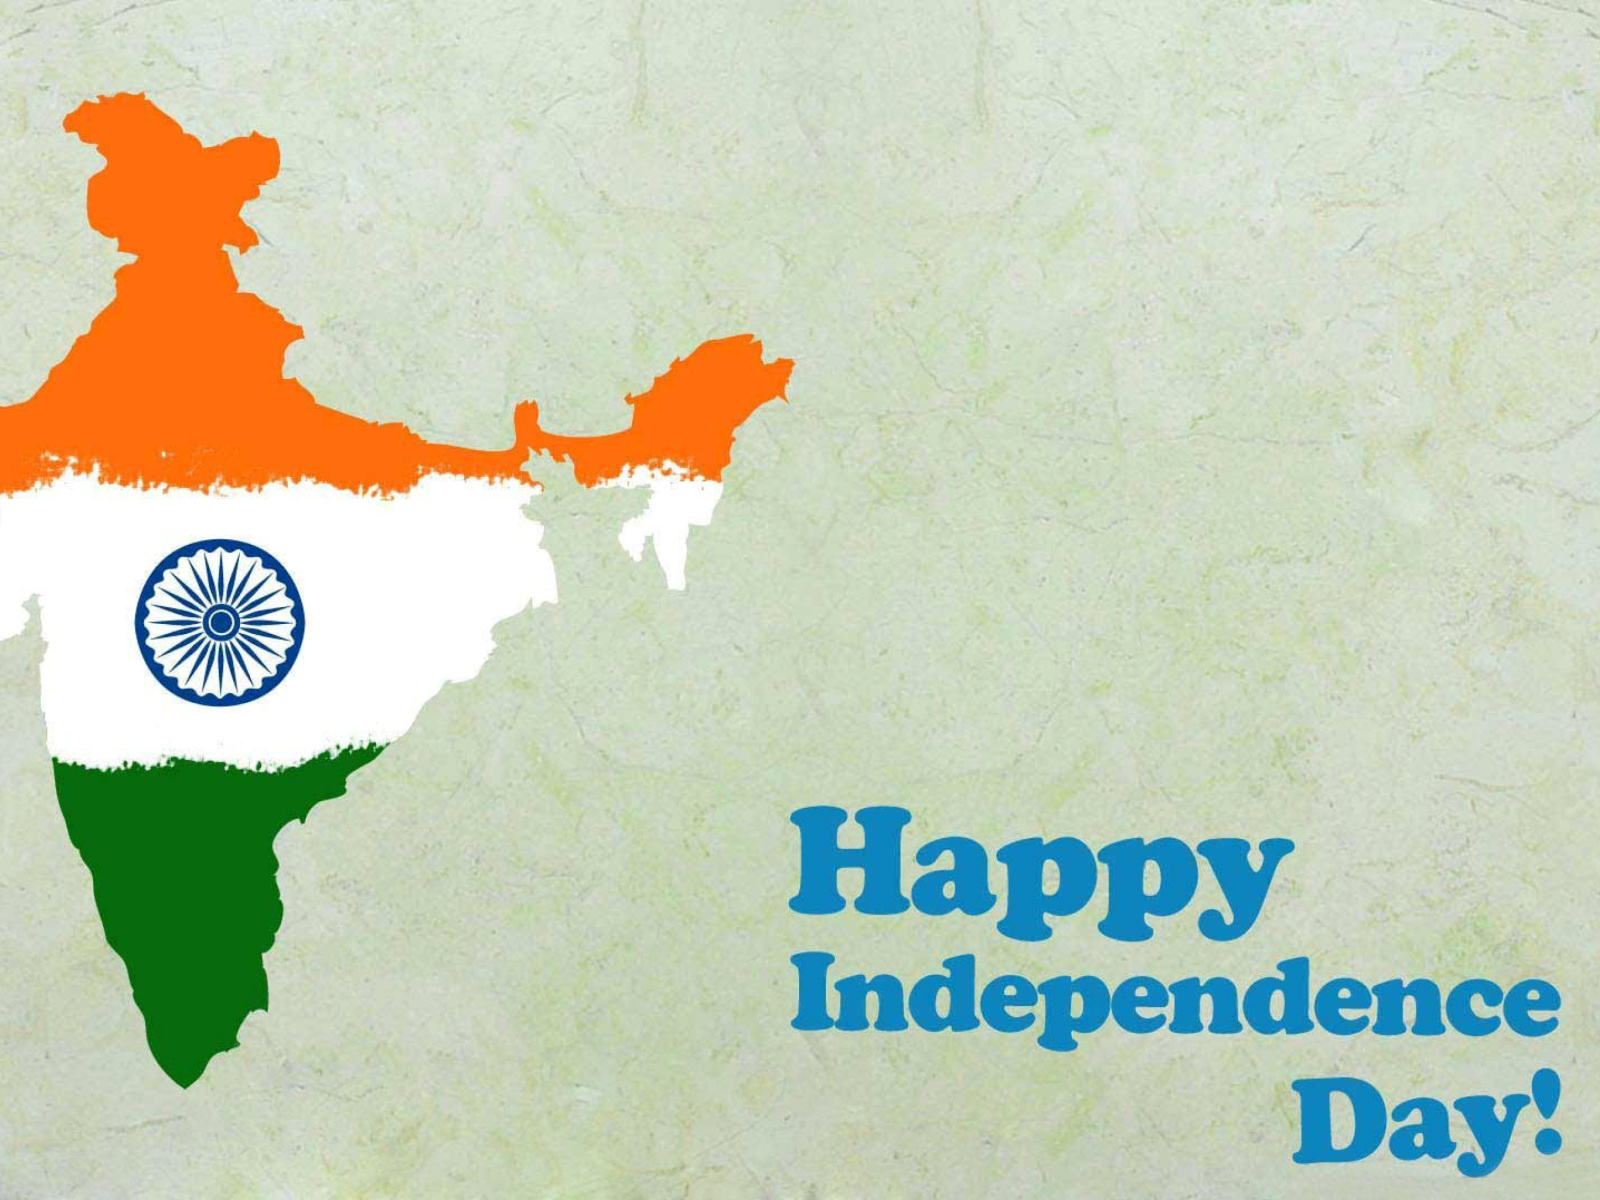 Happy Independence Day India screenshot #1 1600x1200